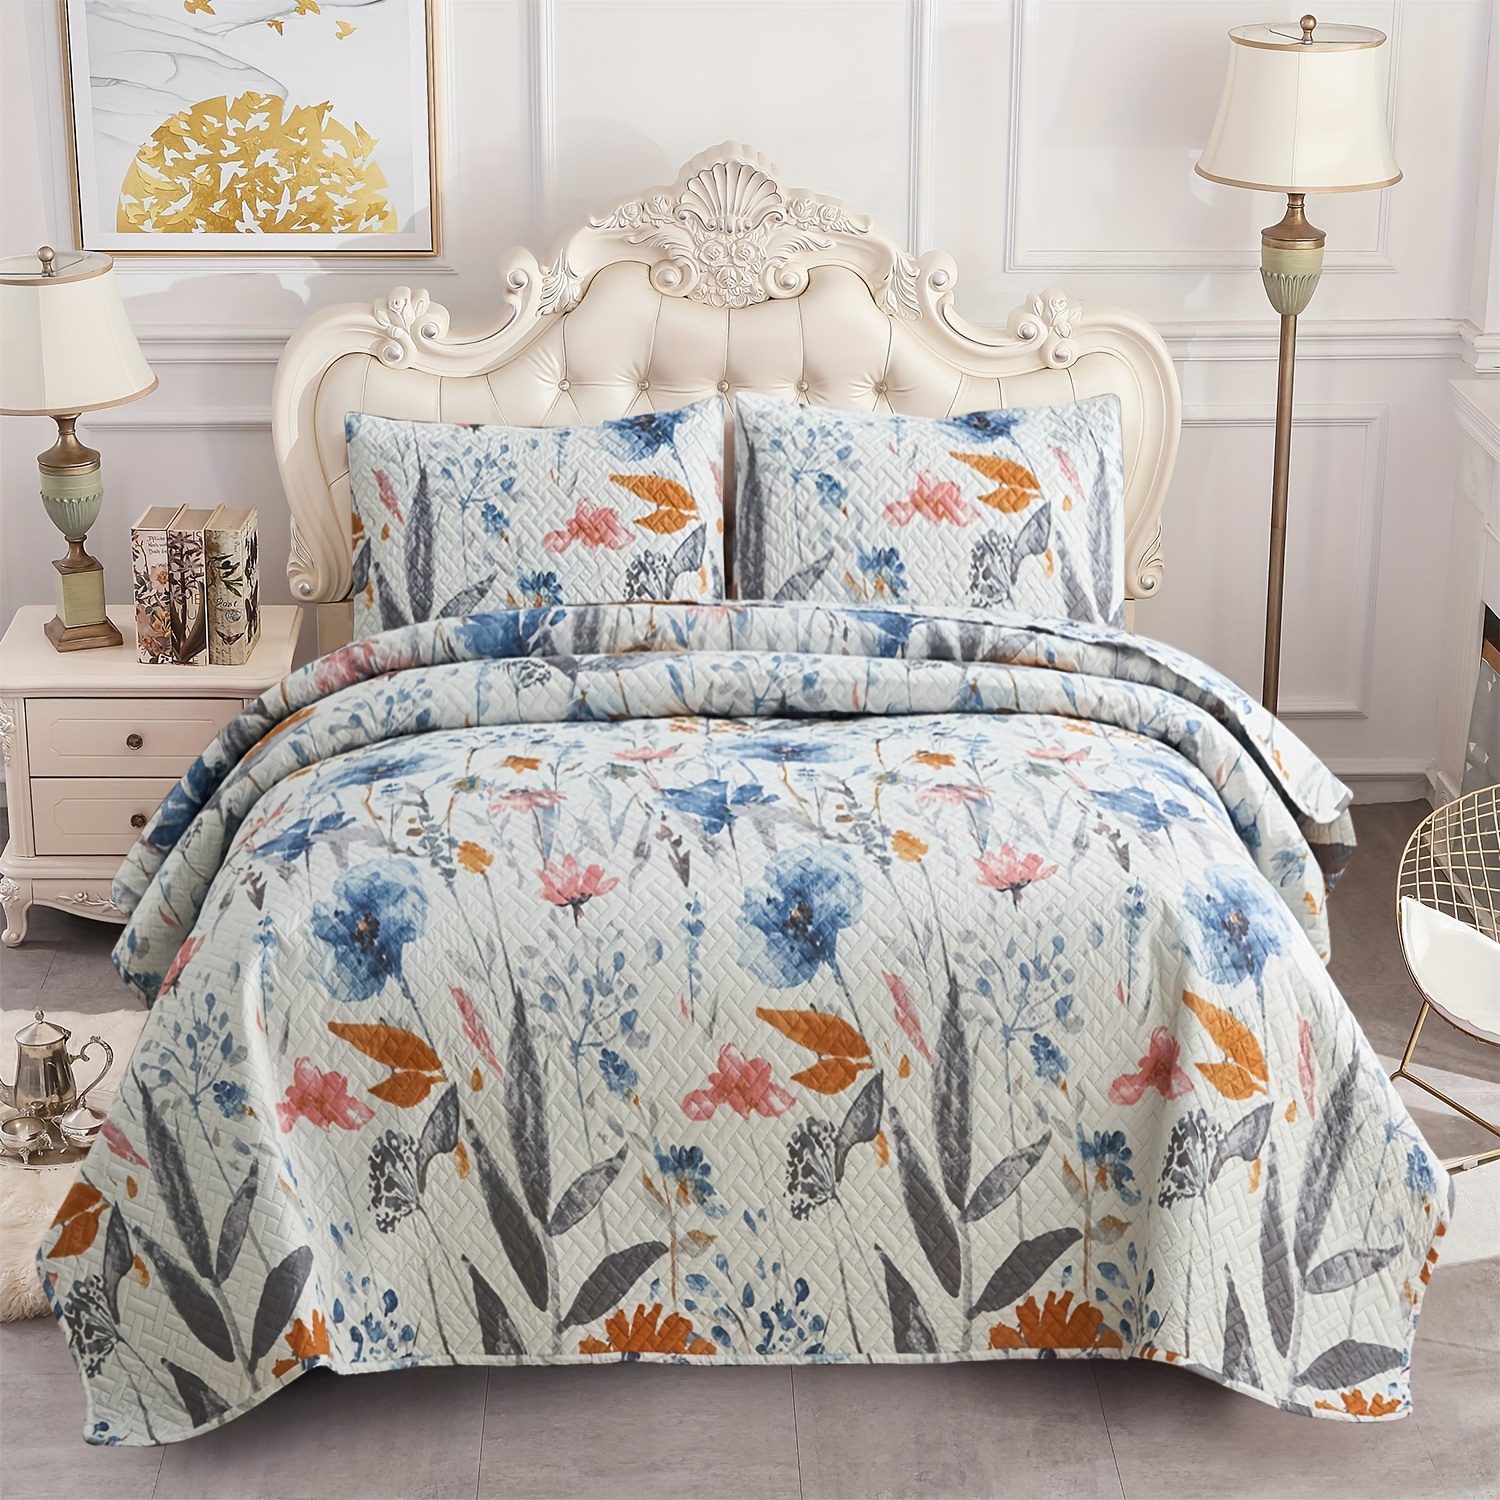 

3-pcs Watercolors Flowers Quilt Set (1*quilt + 2*pillowshams Without Filler), Soft Breathable And Comfortable Bedding Bedspread Coverlet Set Queen&king For All Season Fits Any Decro